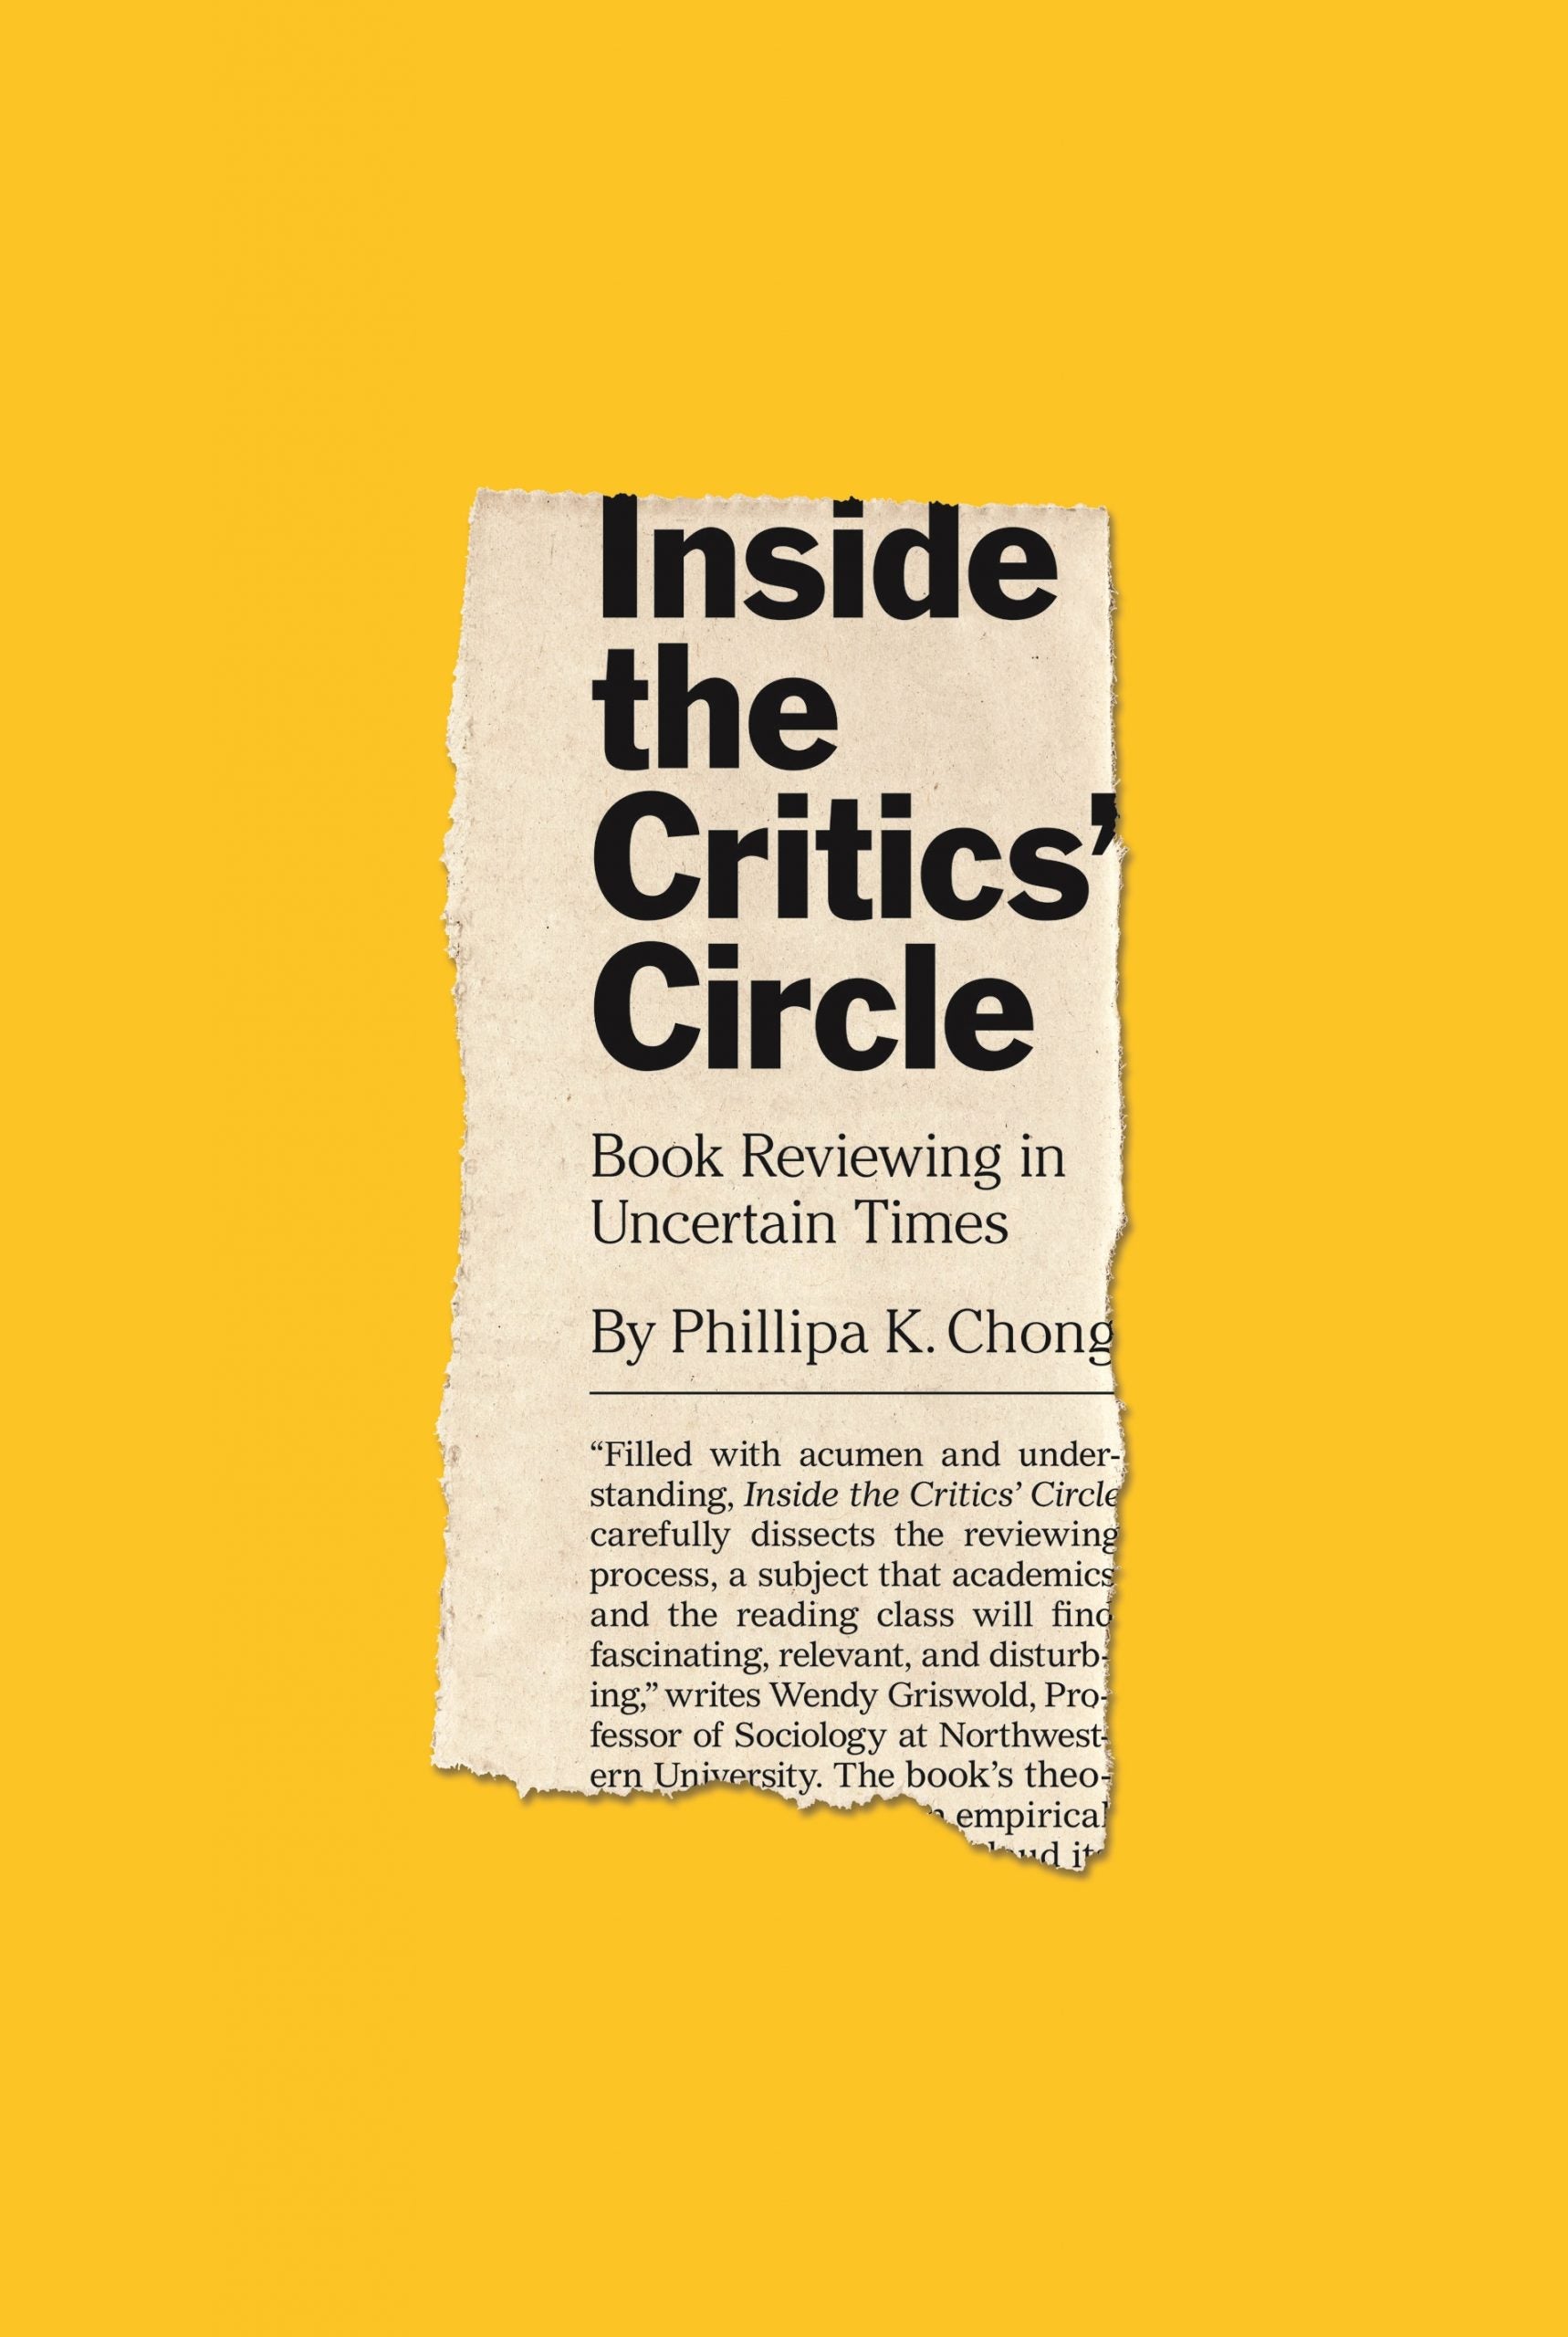 Phillipa K. Chong. Inside the Critics’ Circle: Book Reviewing in Uncertain Times.